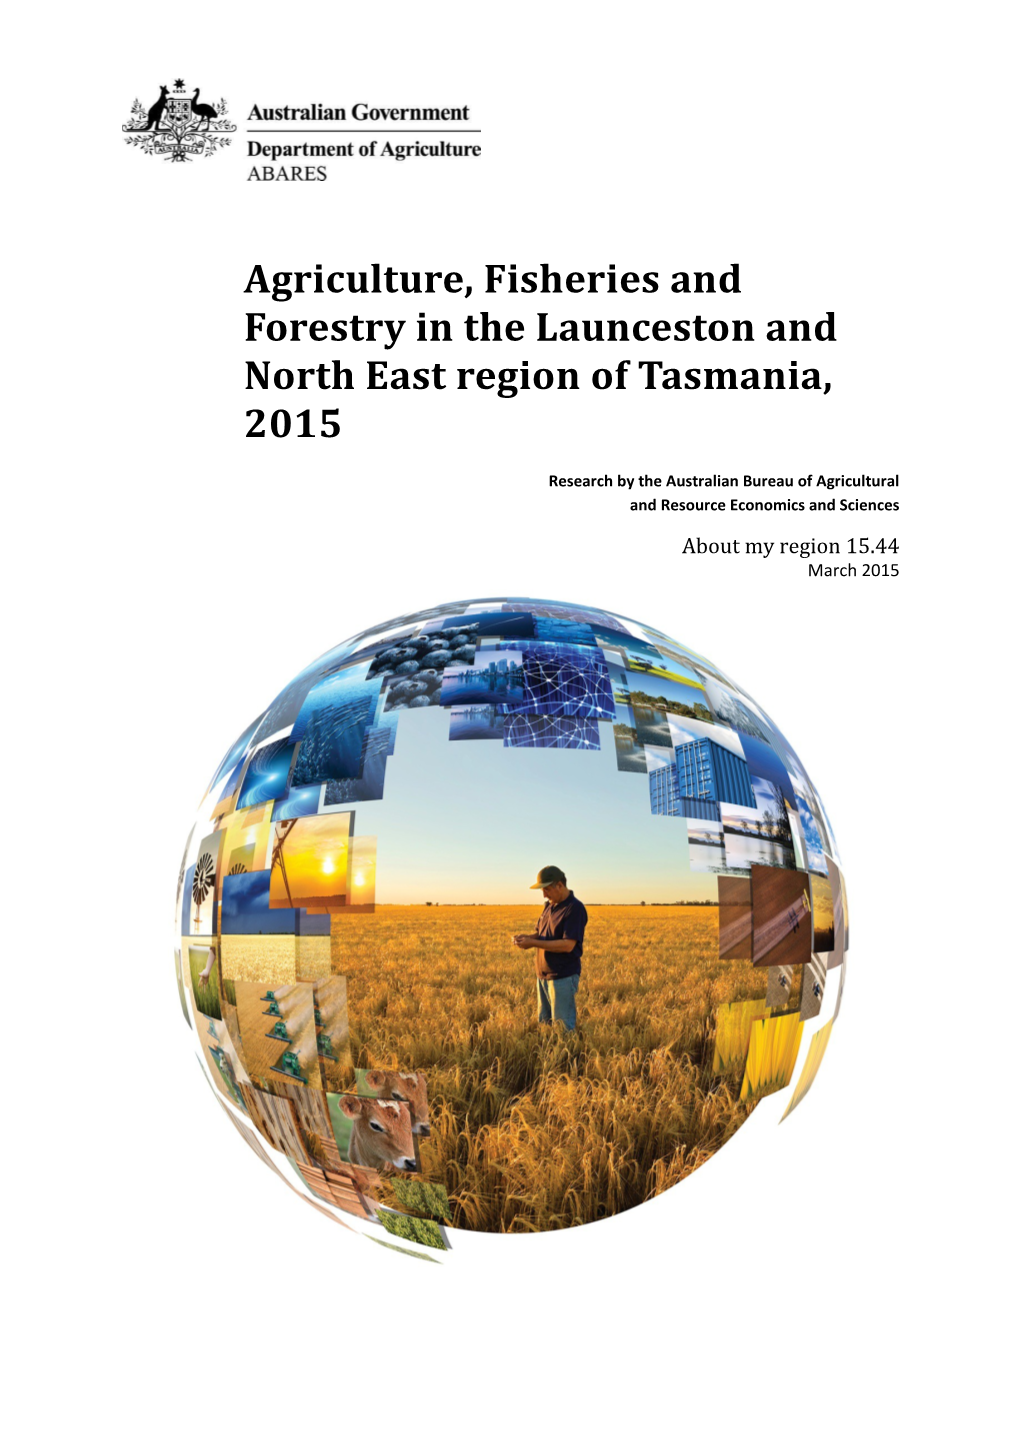 Agriculture, Fisheries and Forestry in the Launceston and North East Region of Tasmania, 2015